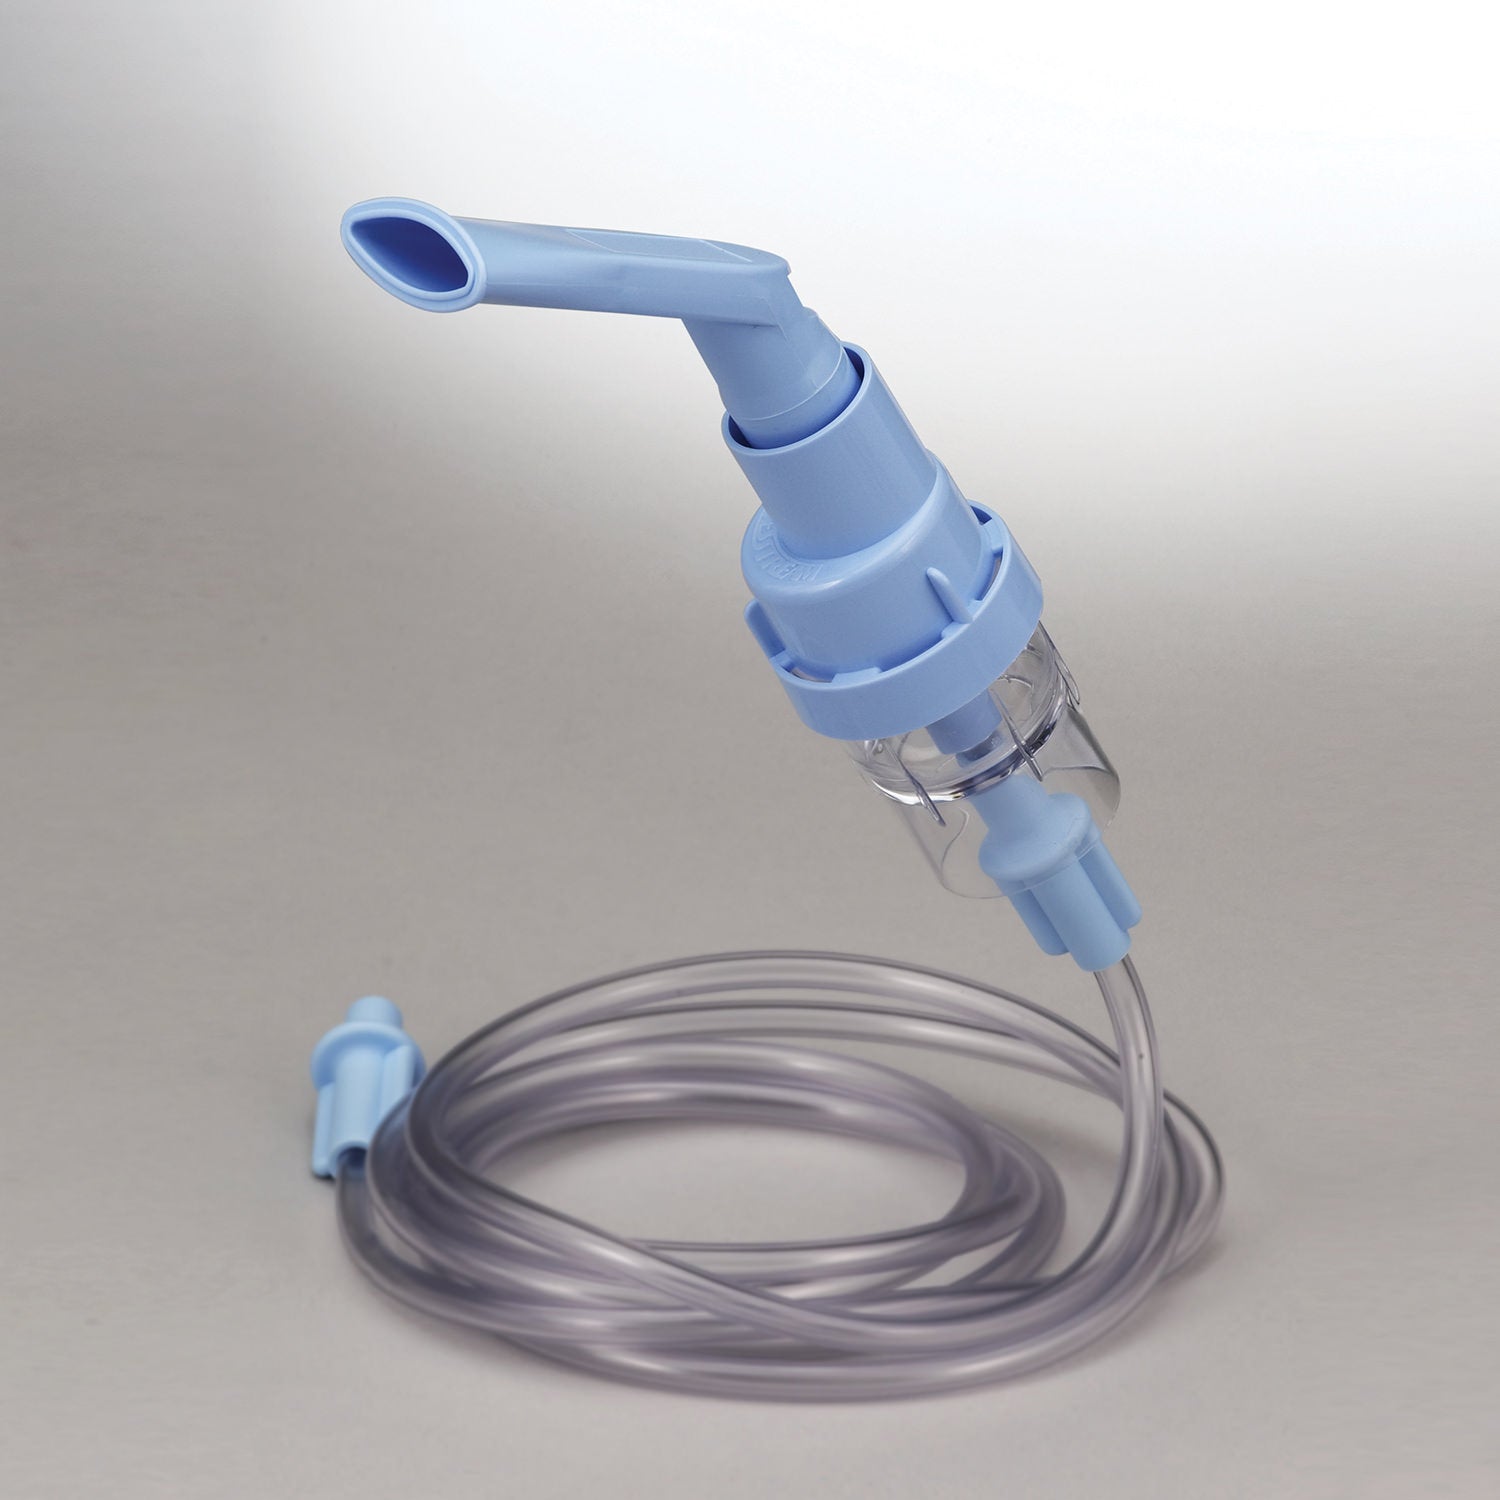 Carrying Case - Nebulizer Parts - Respiratory Therapy Parts